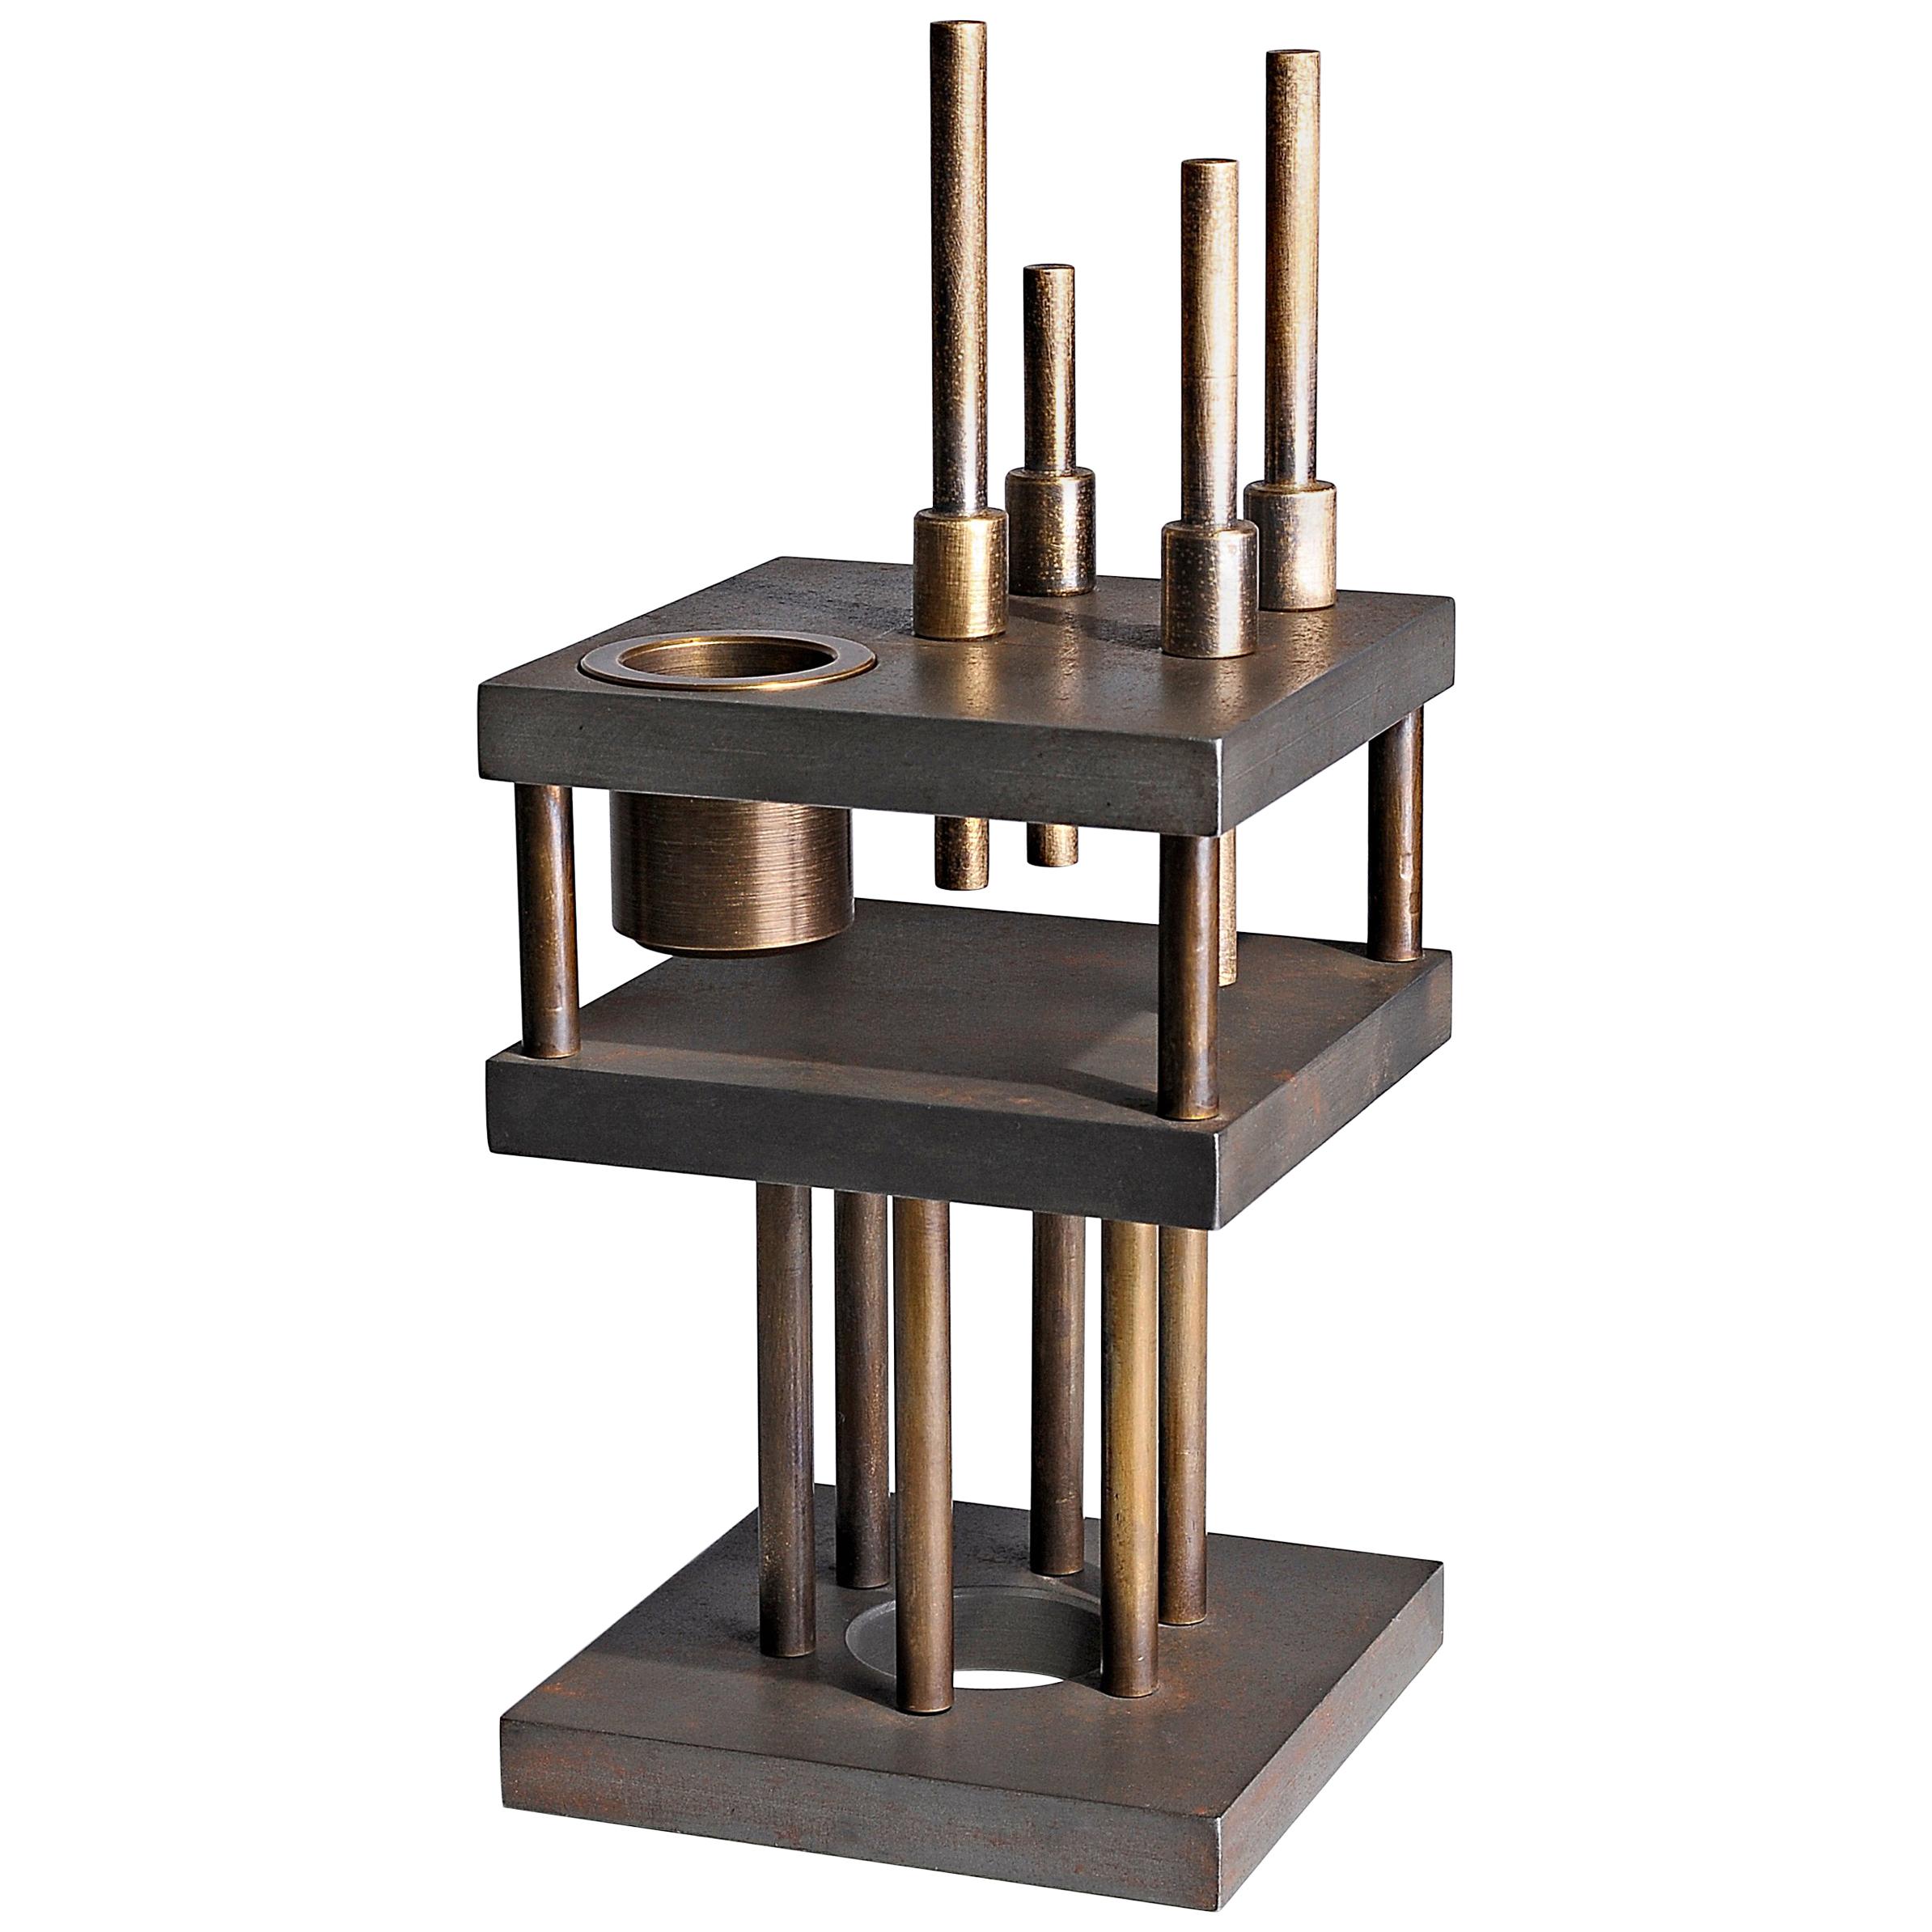 Unique Steel and Brass Candleholder “Brut”, Signed by Lukasz Friedrich For Sale